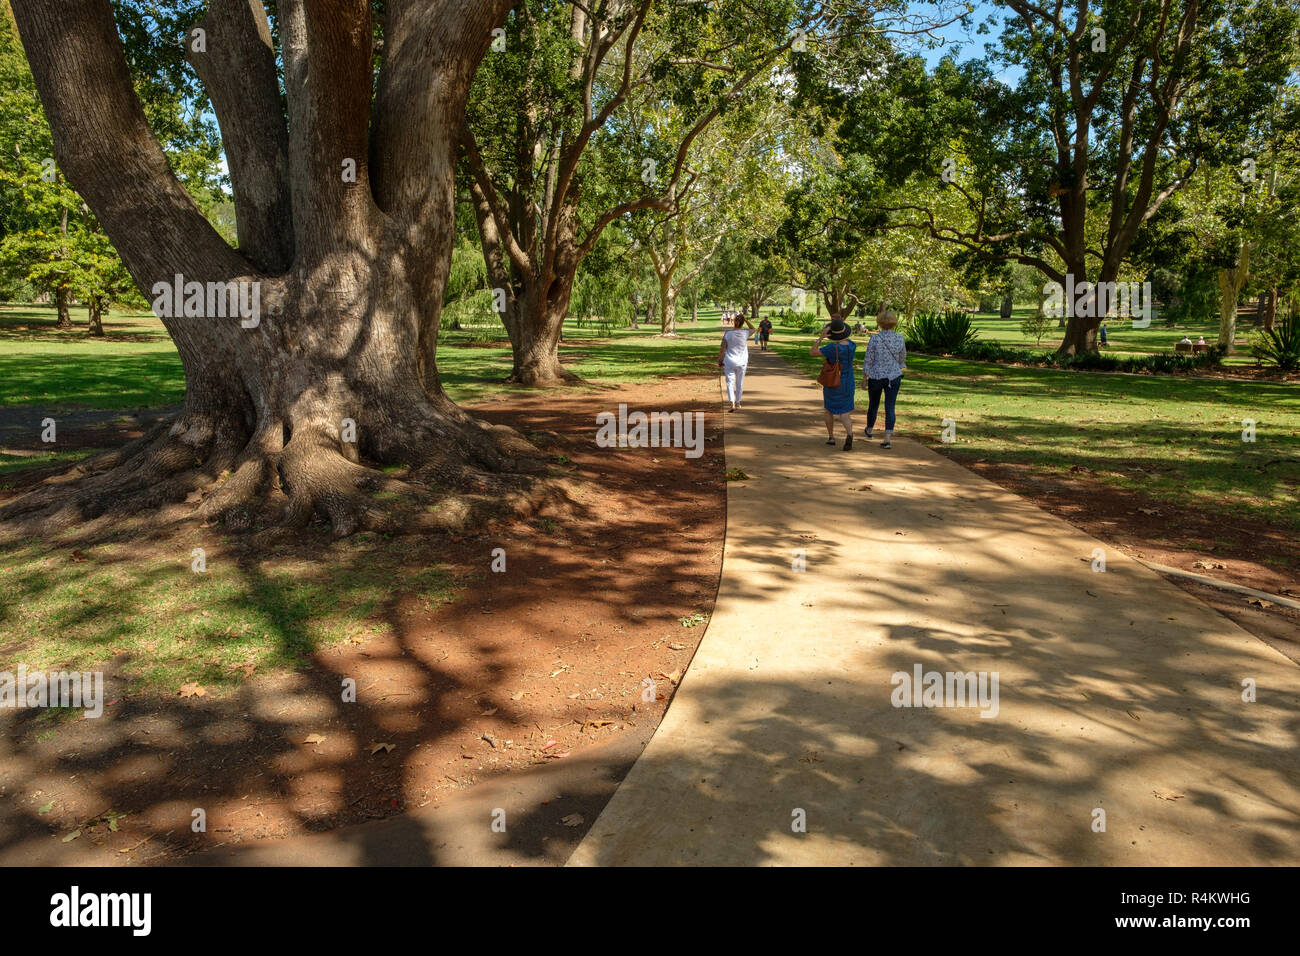 Queens Park Gardens, Toowoomba Banque D'Images